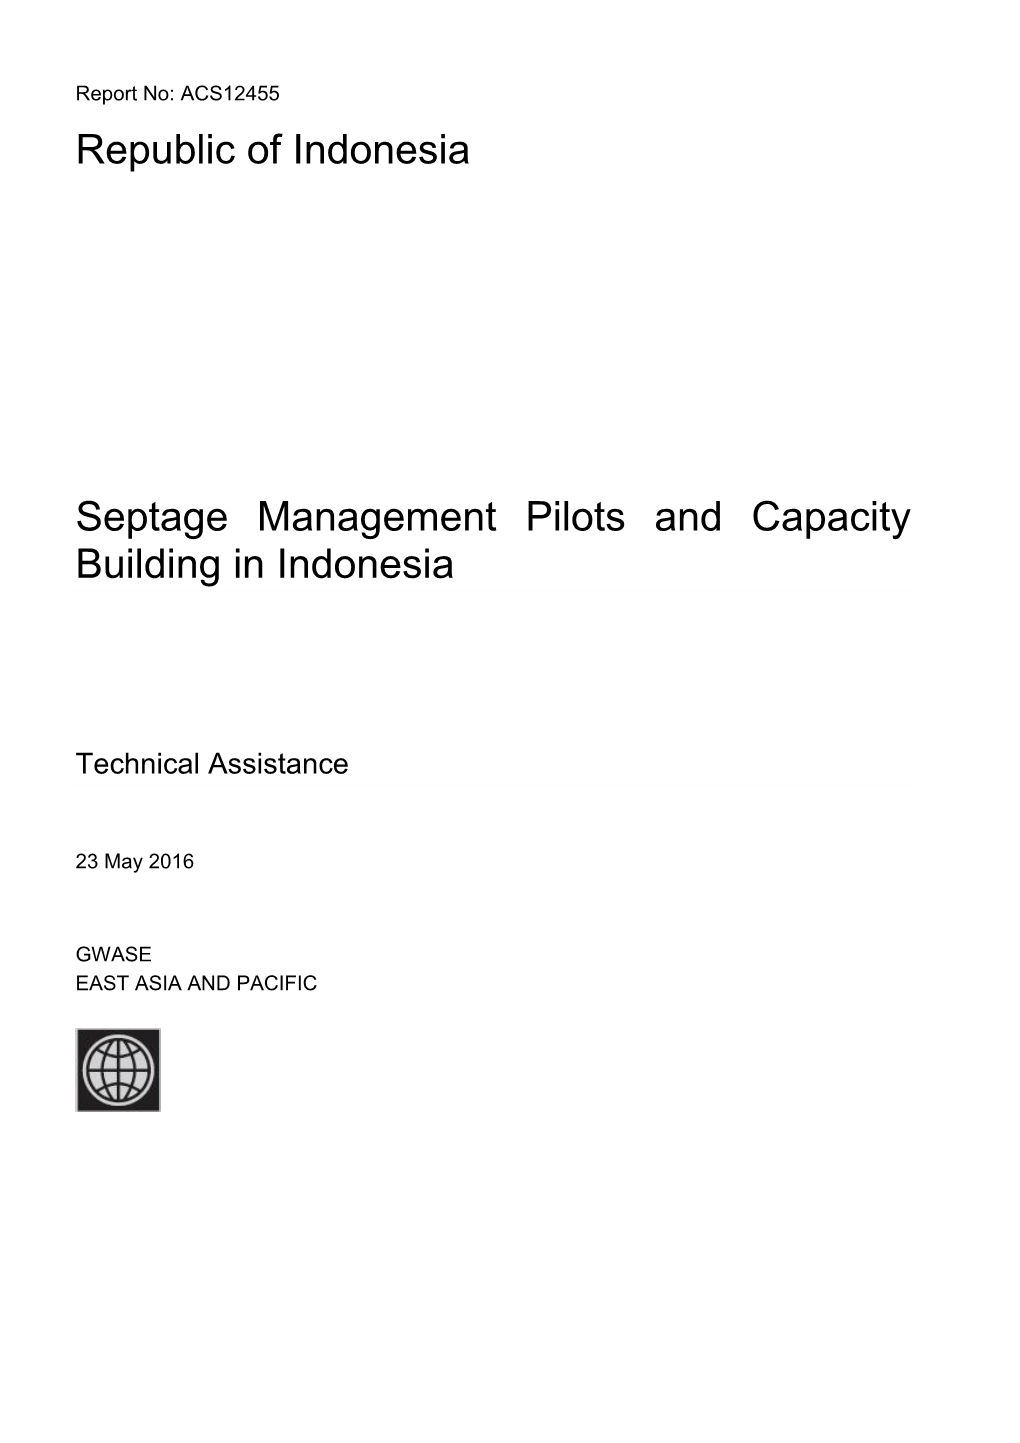 And Capacity Building in Indonesia